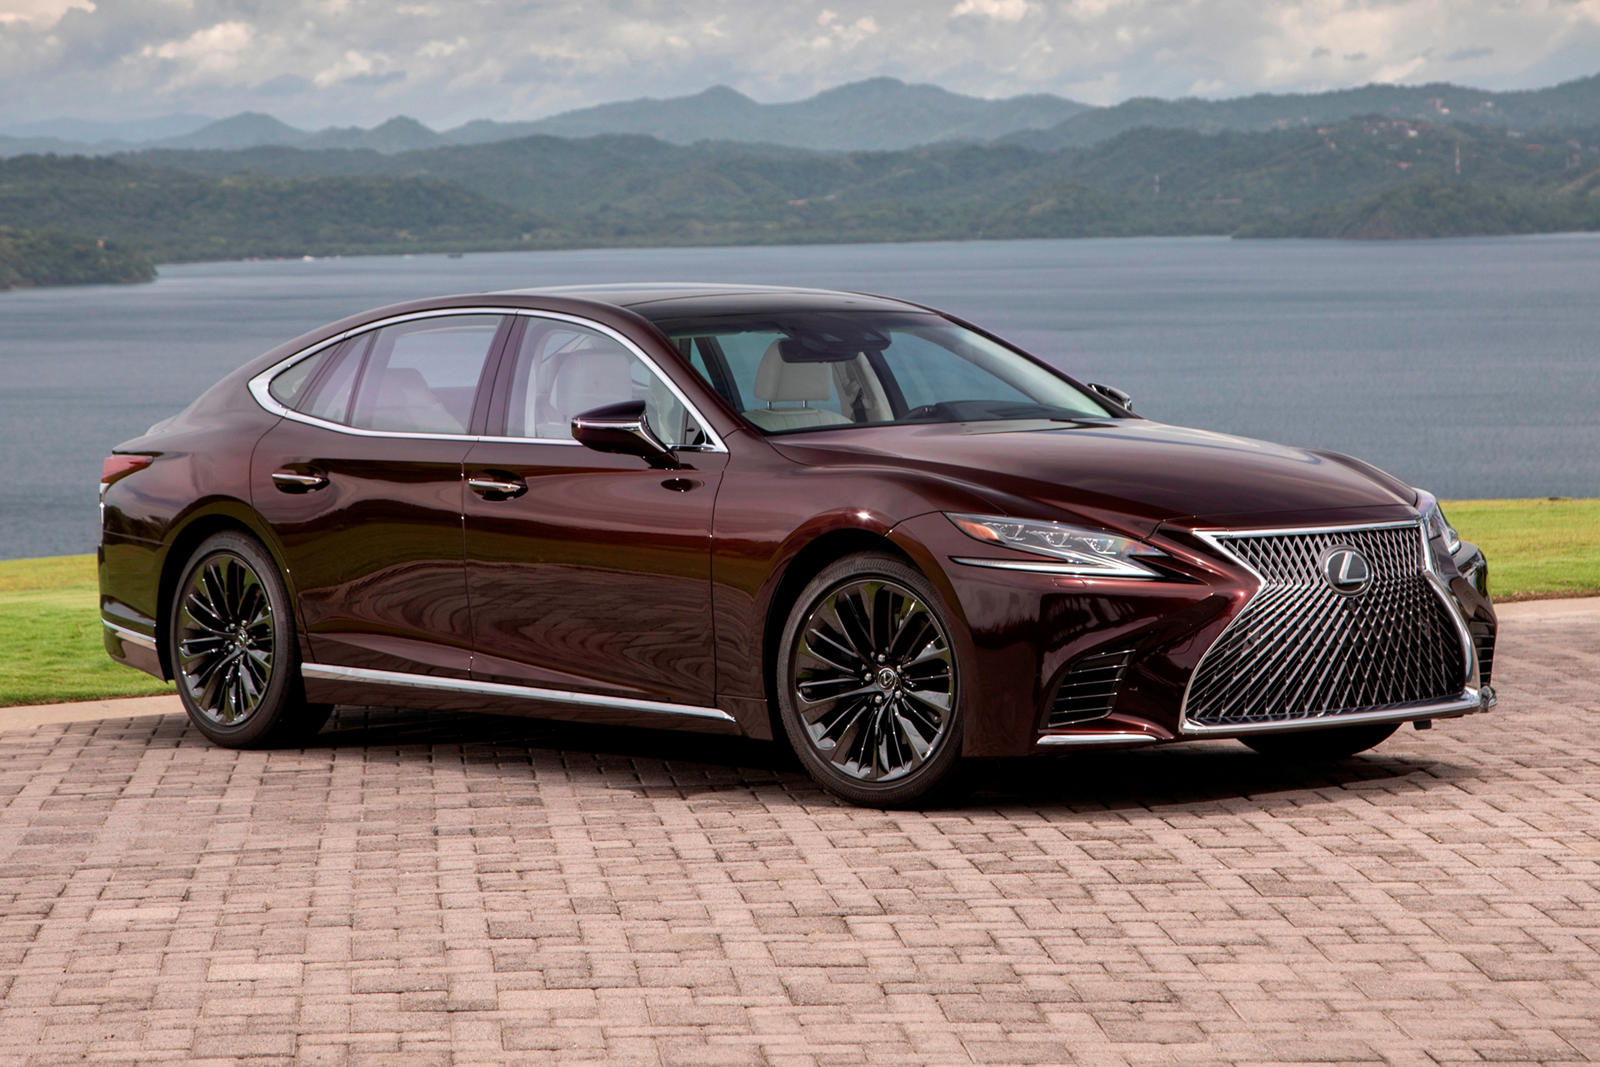 LimitedEdition Lexus LS 500 Unveiled With Striking New Look CarBuzz